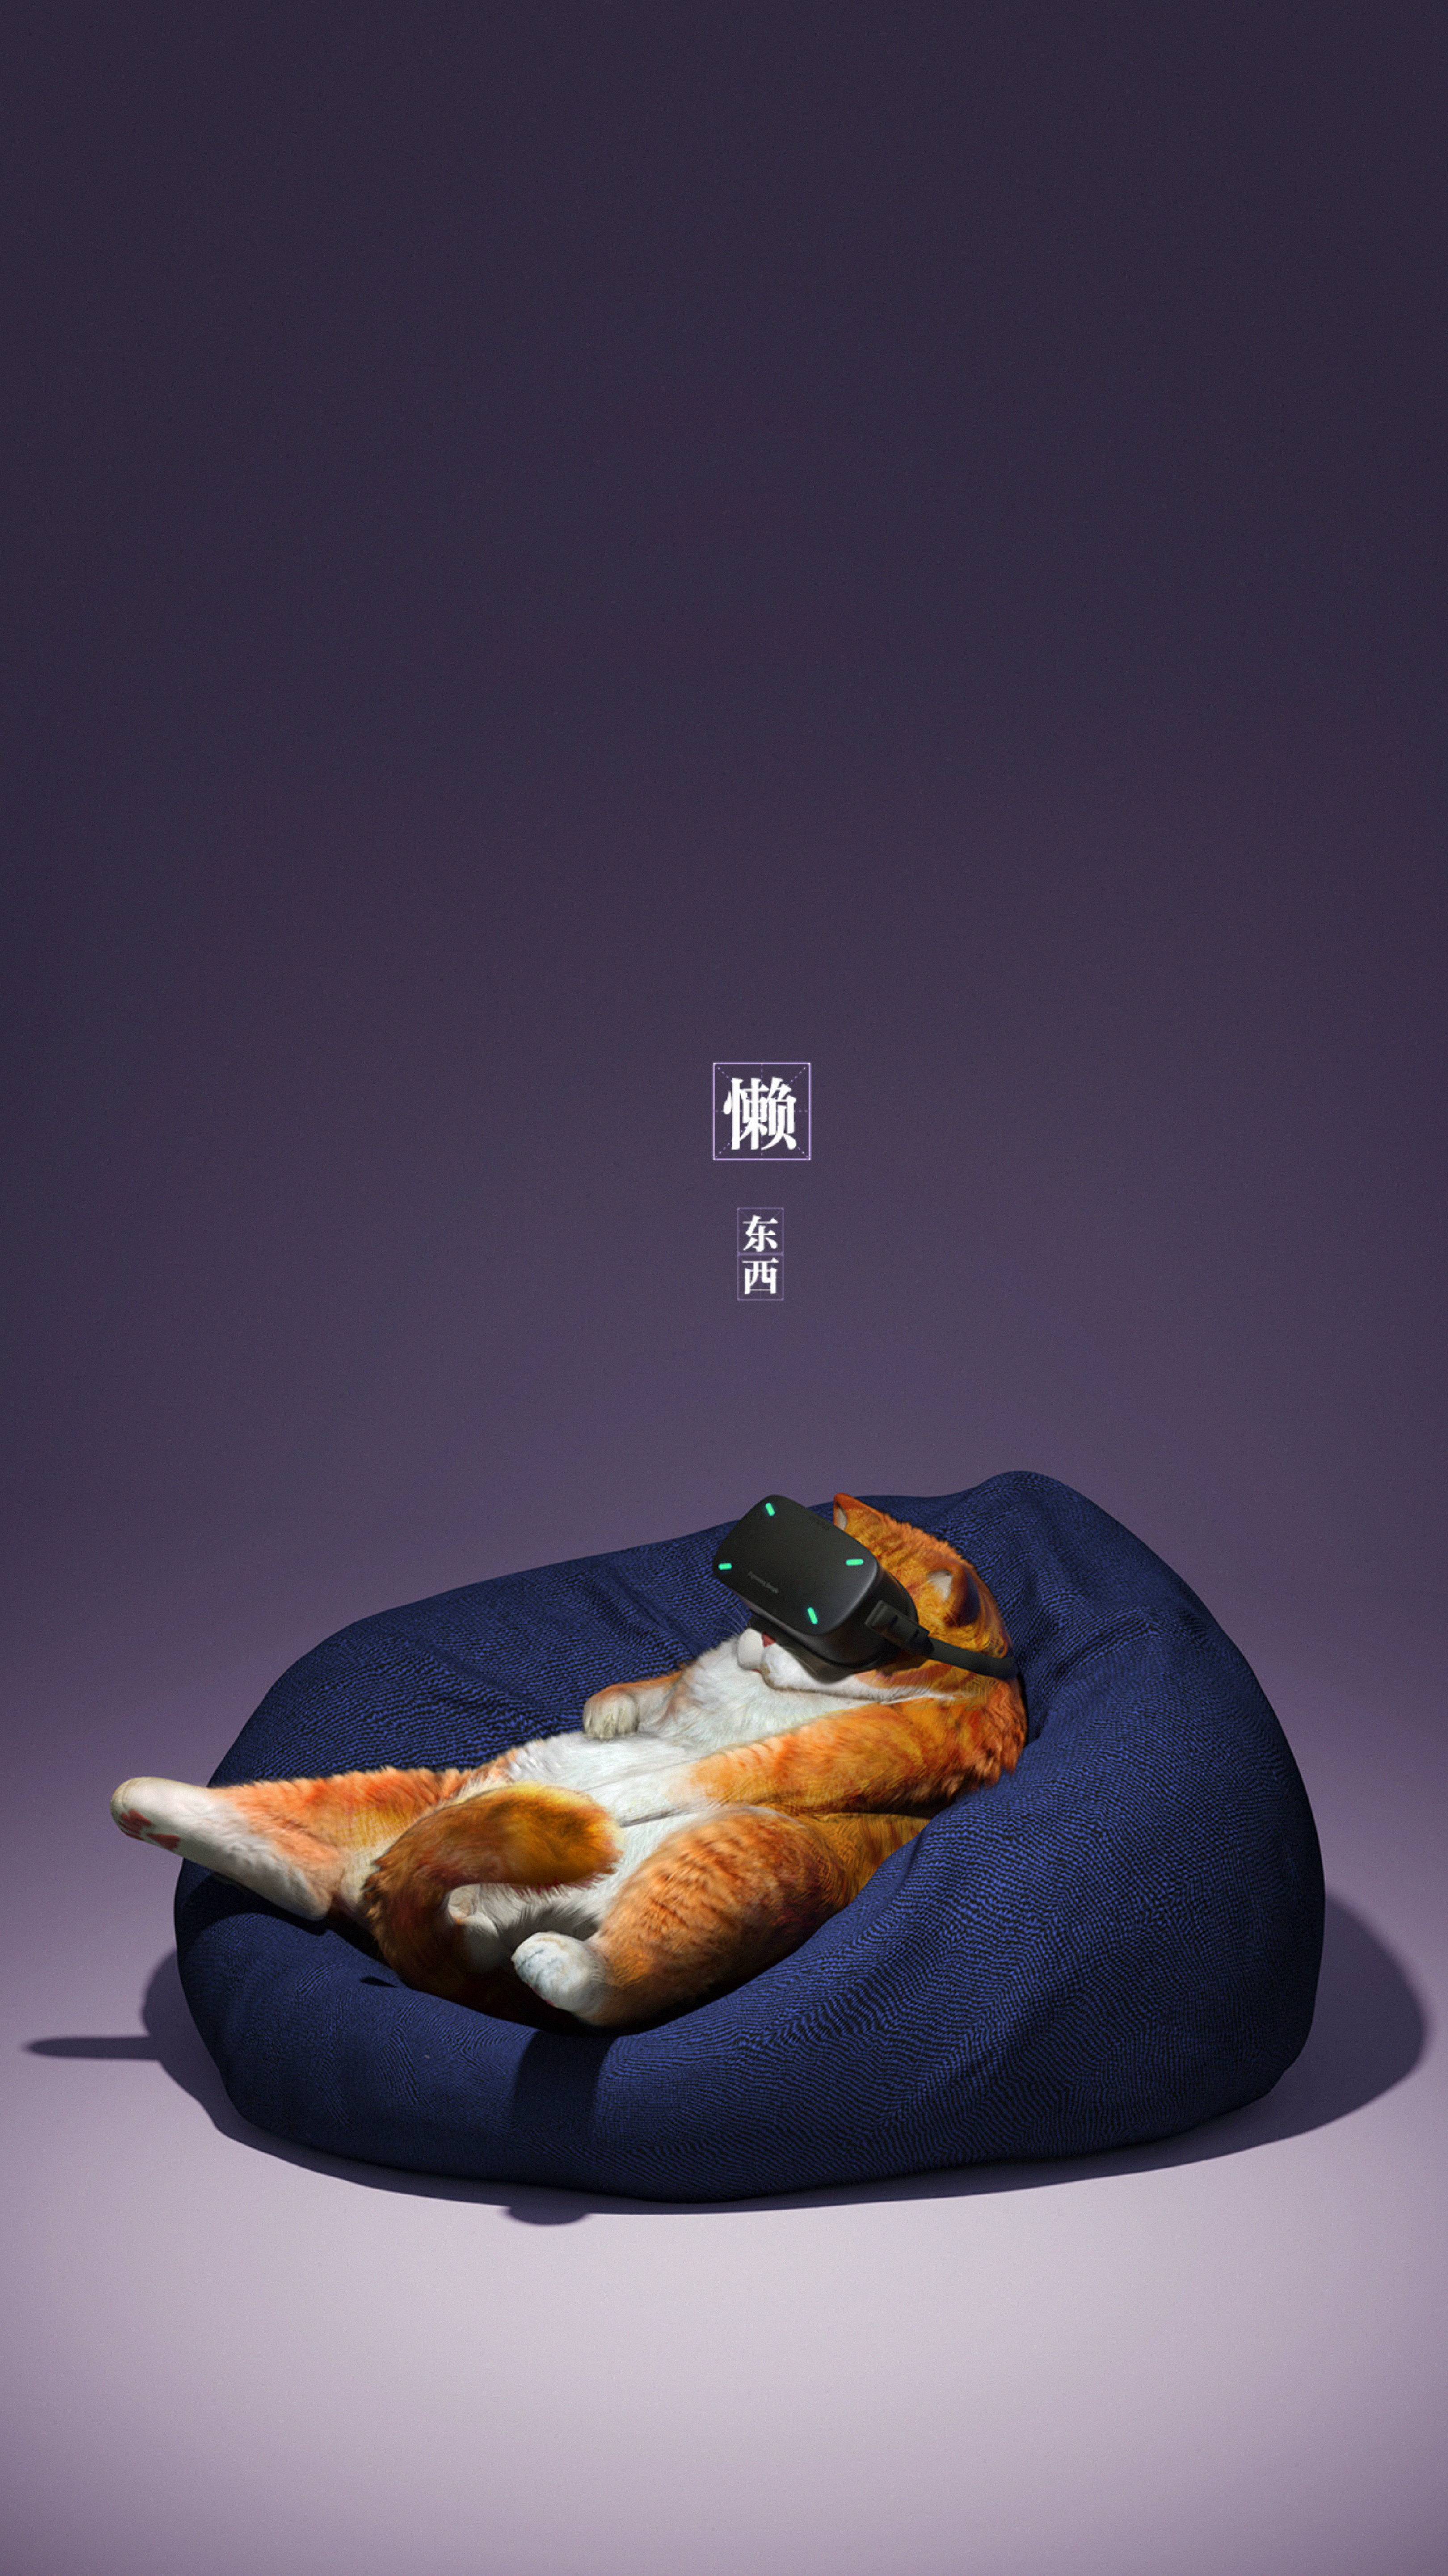 cool, funny, miscellanea, miscellaneous, cat, glasses, spectacles, virtual reality Full HD